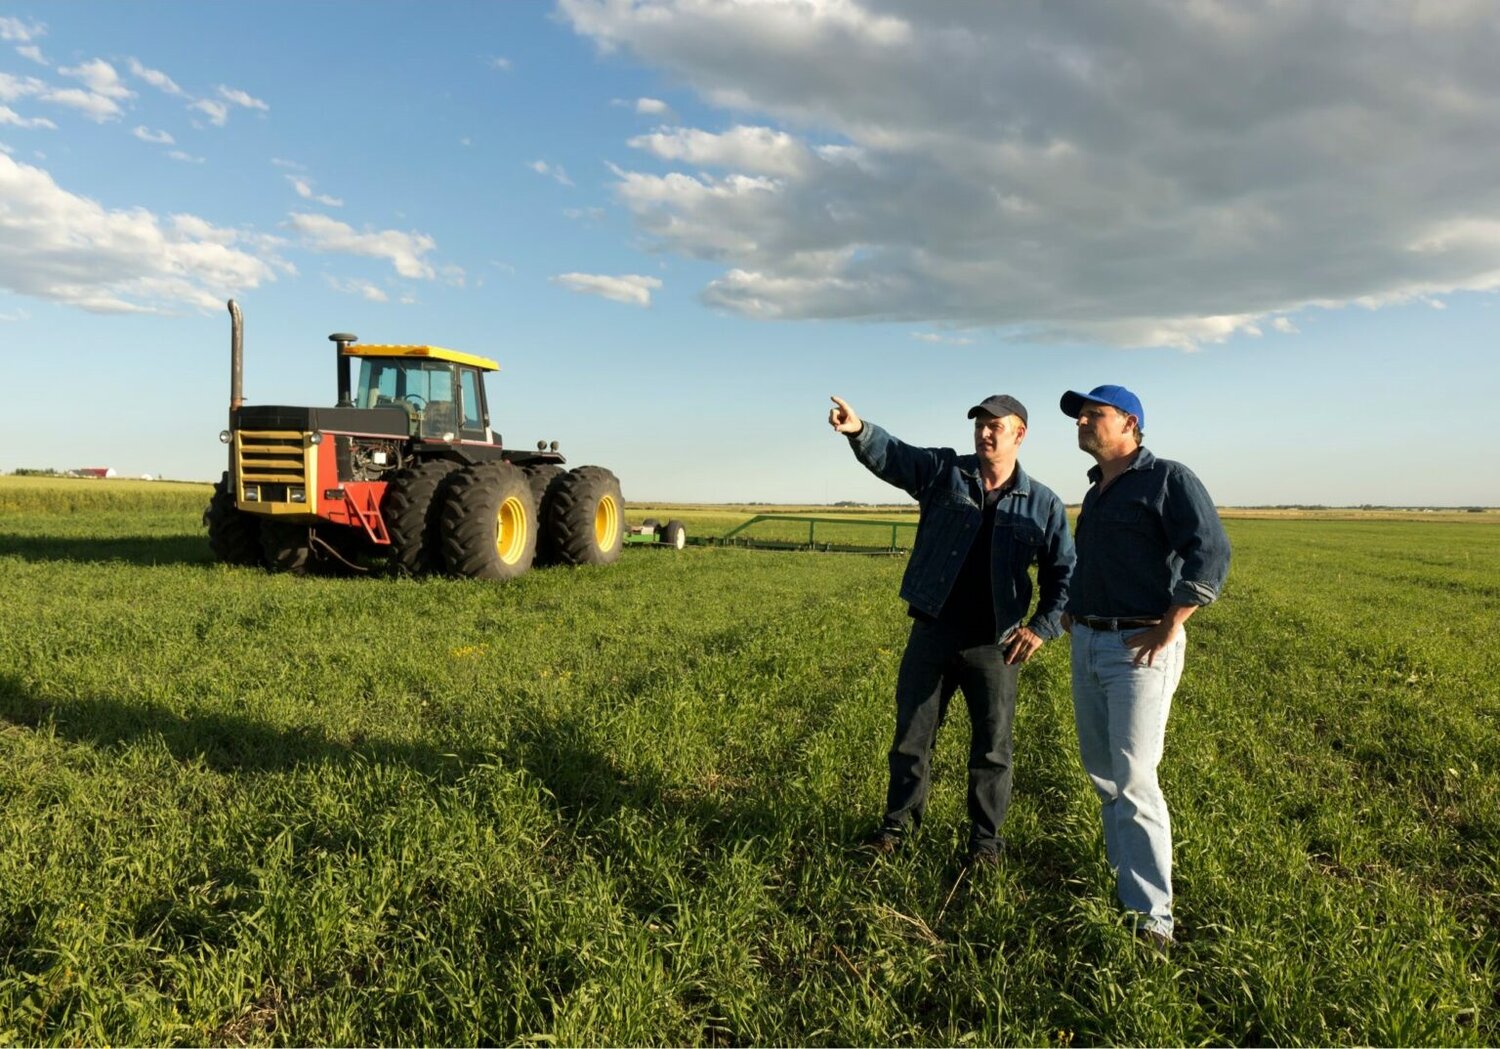 Native American agricultural leaders are seeking an expansion of tribes’ jurisdiction over U.S. Department of Agriculture programs in the upcoming farm bill.